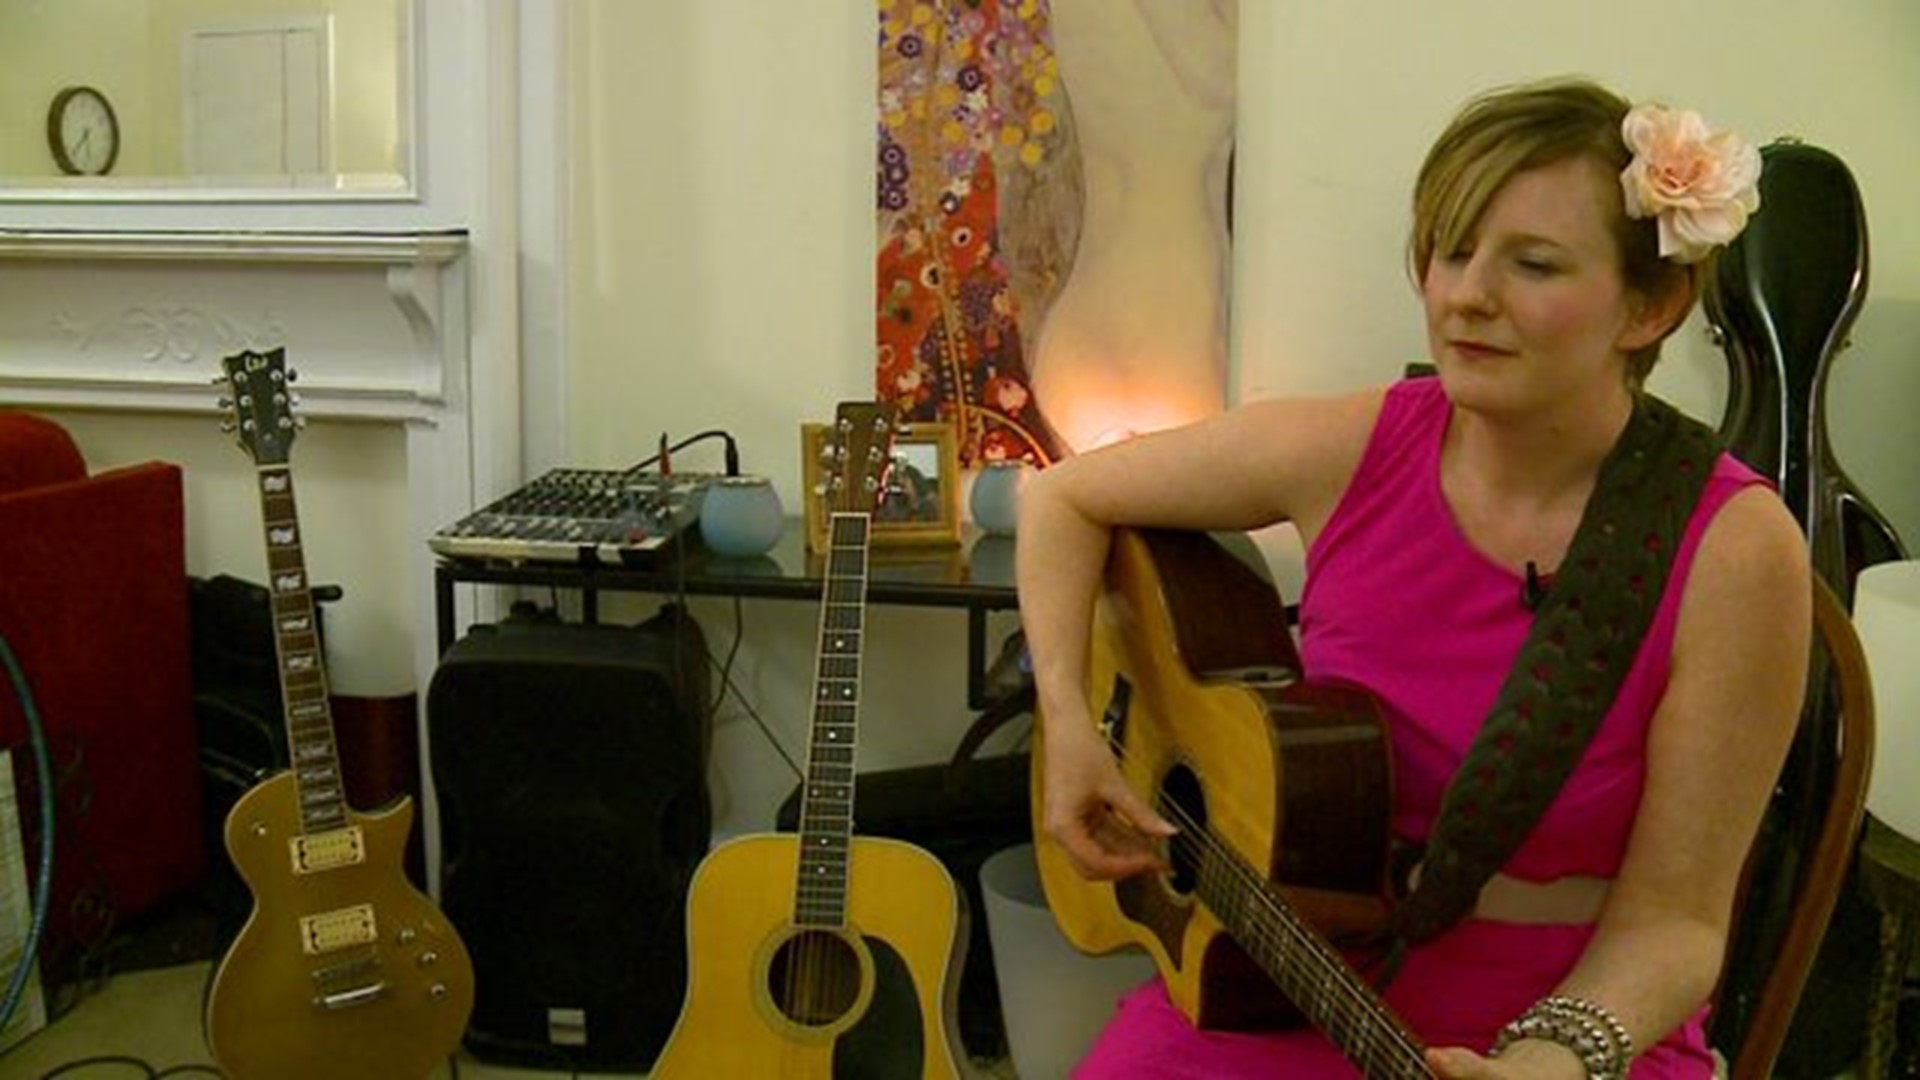 State troubadour got where she is through the healing power of music